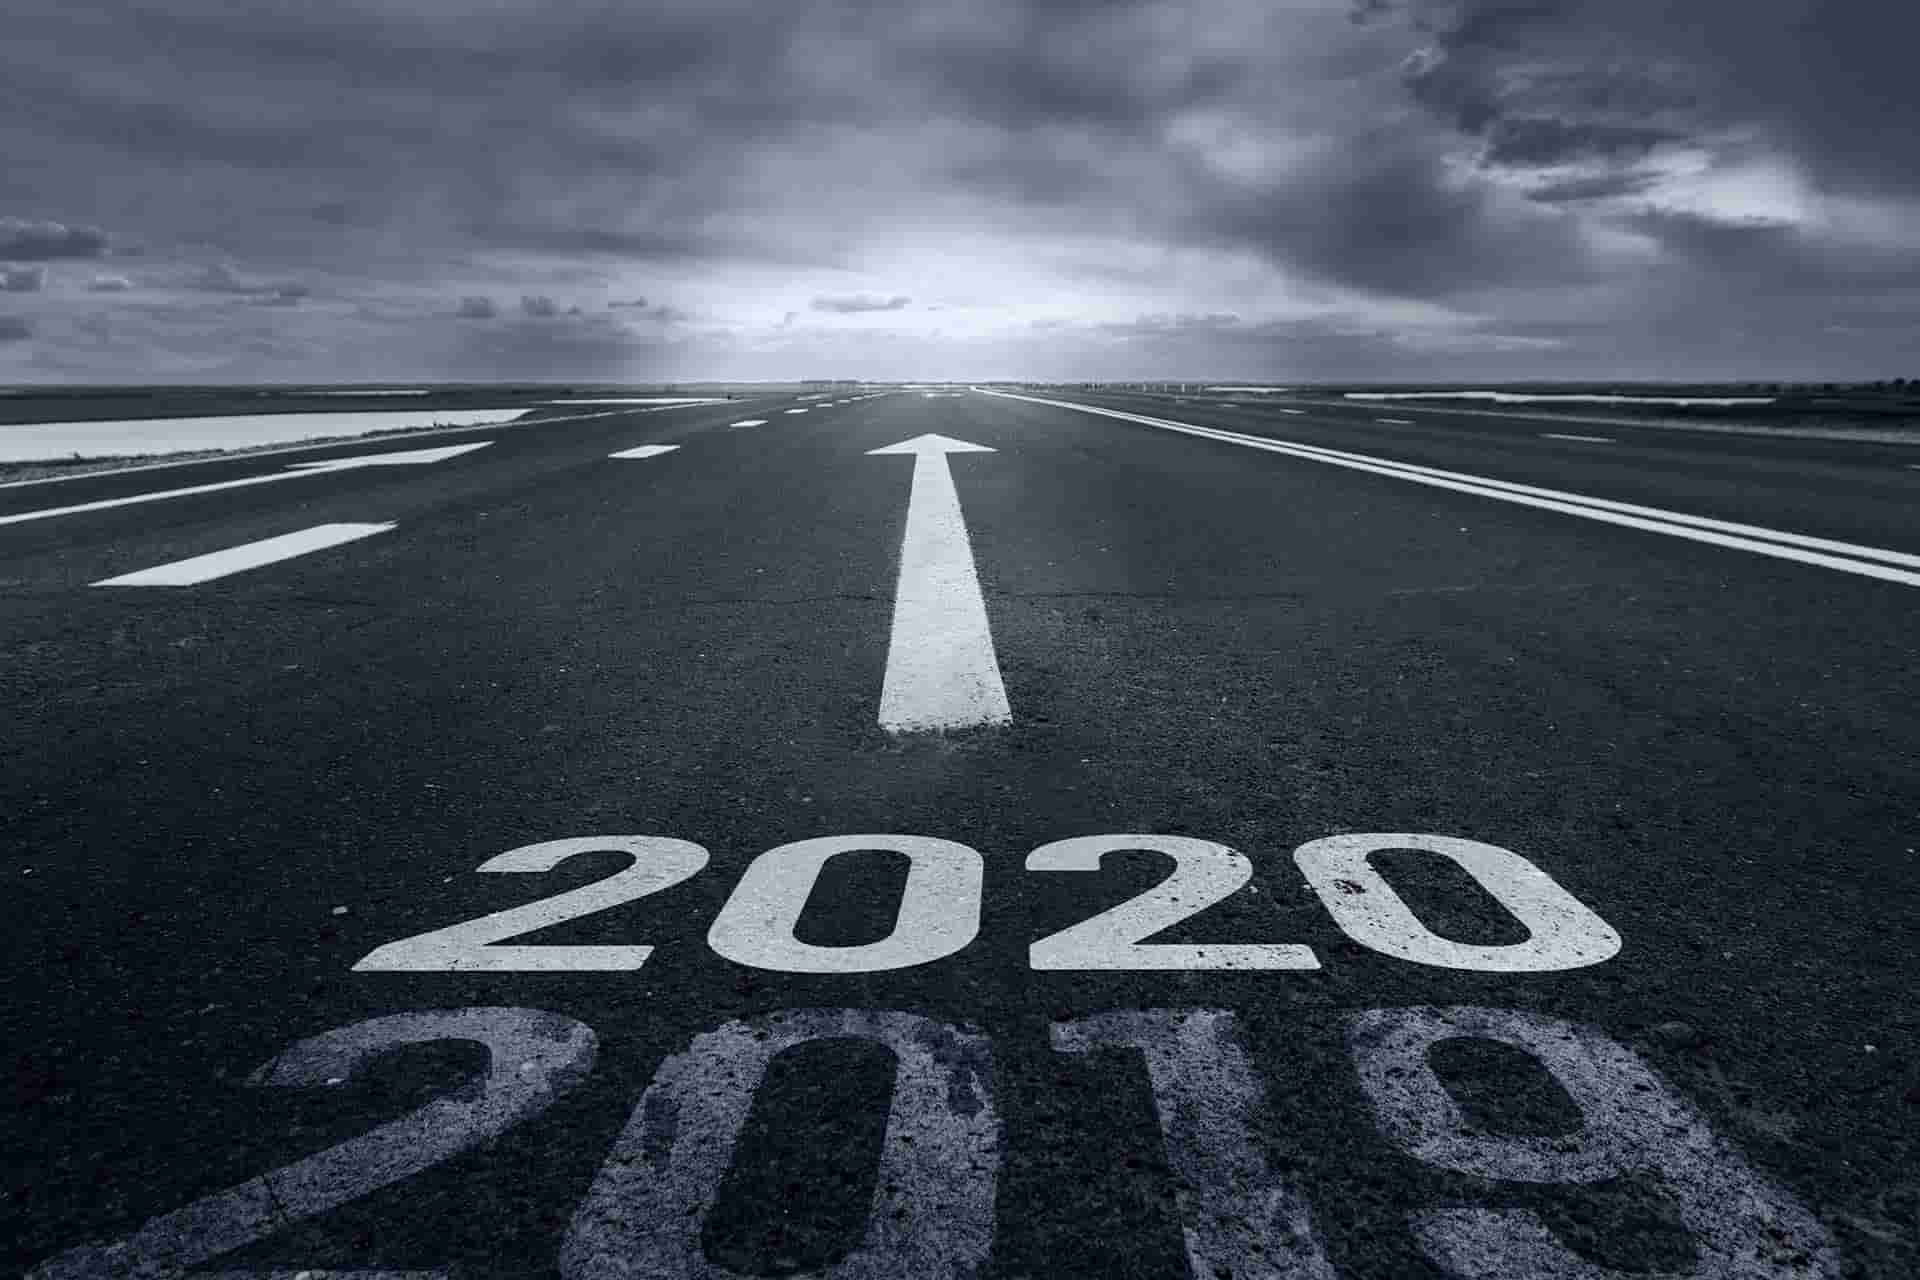 2020-IS-THE-TIME-FOR-ACTION